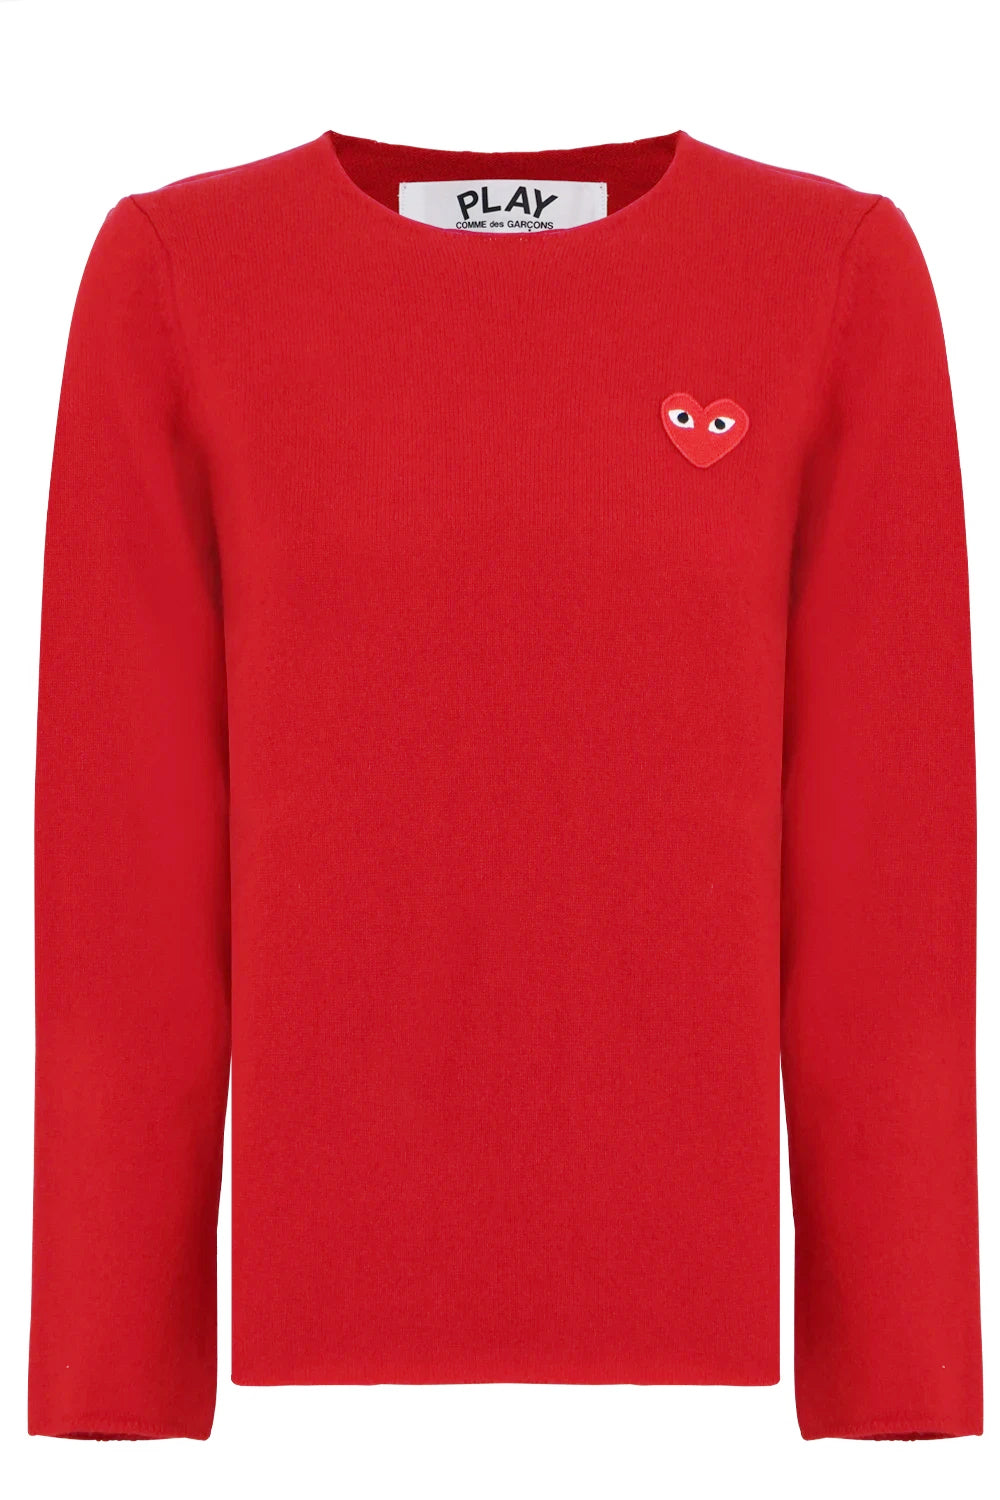 COMME DES GARCONS PLAY RTW PLAY WOMEN'S RED HEART KNIT  L/S RED